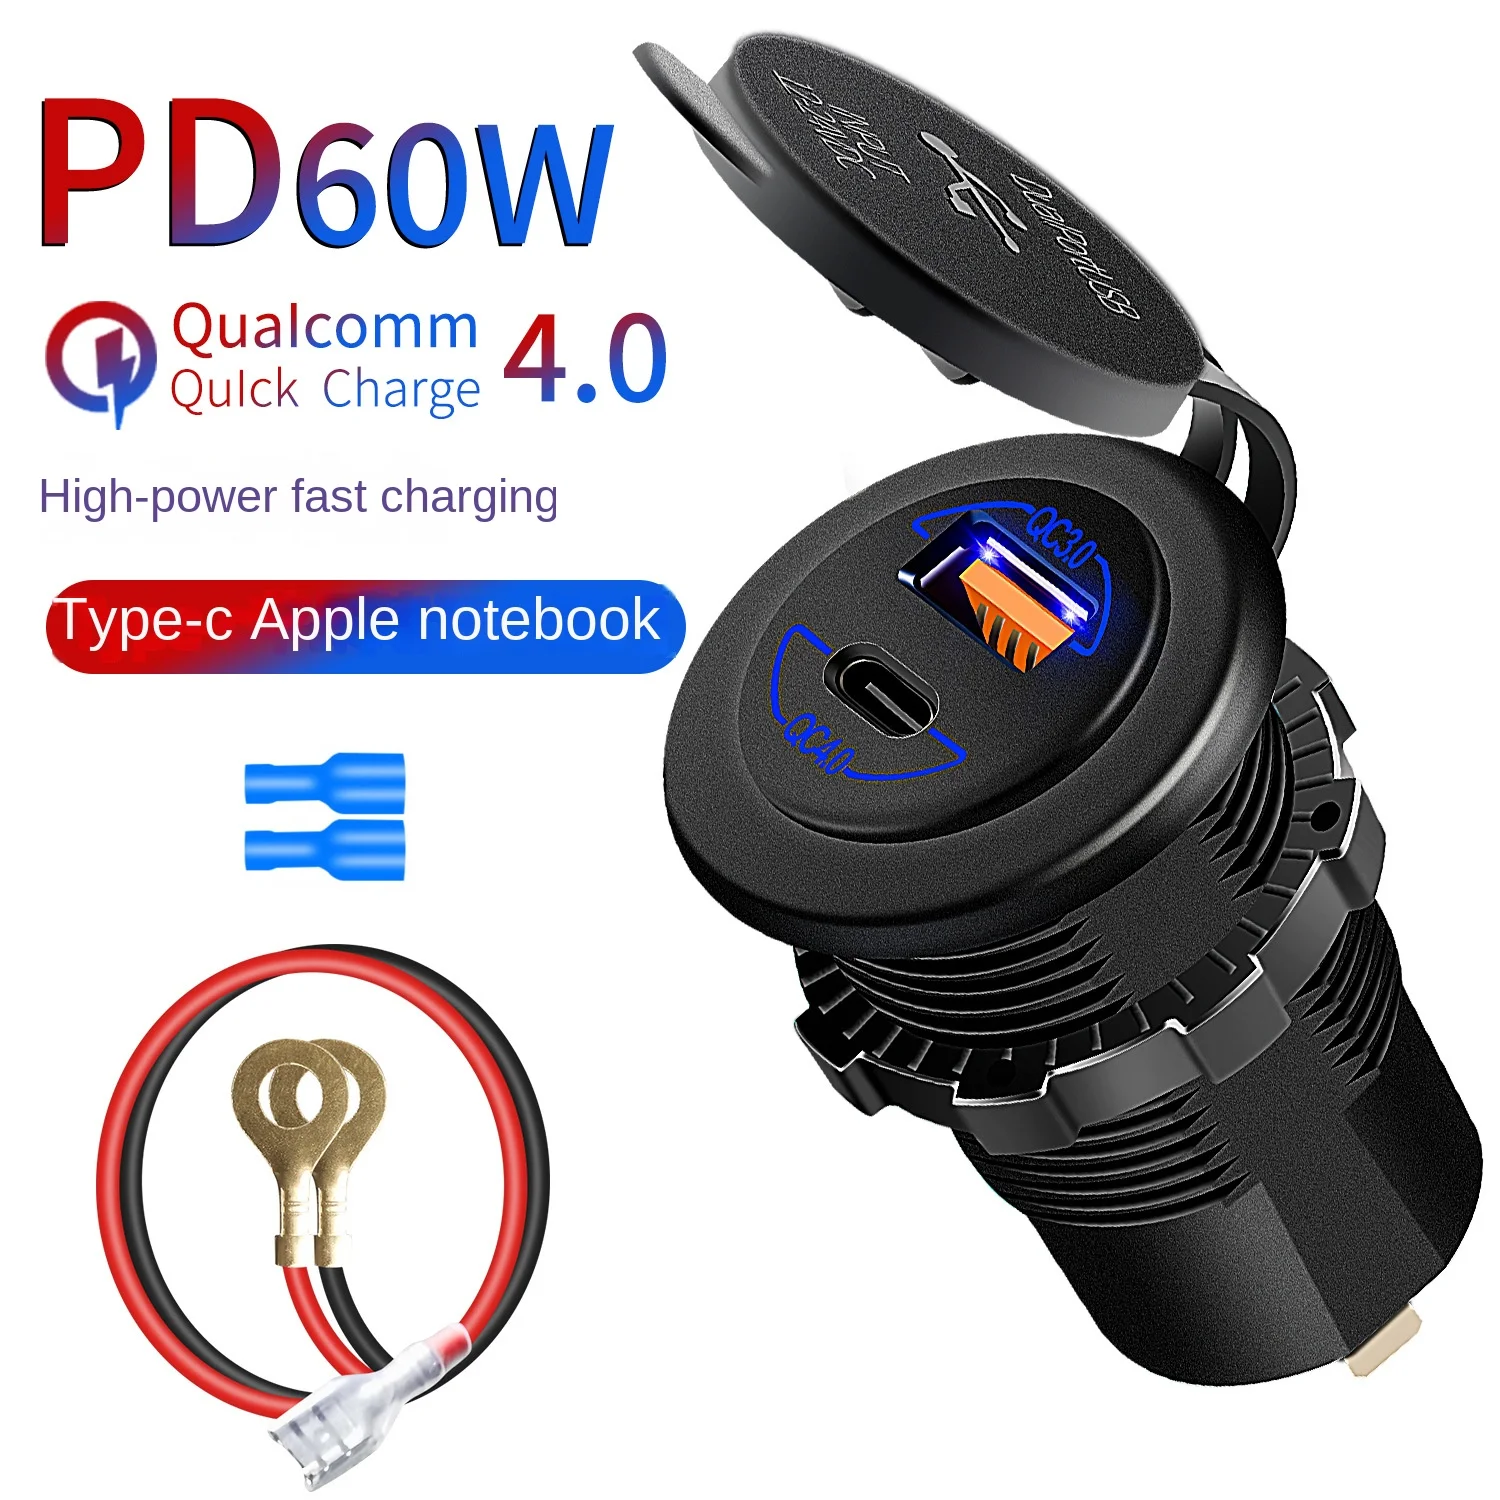 

Motorcycle Charger 5V3A Mobile Phone Charger USB Port Car QC4.0 Fast Charge PD60W Charger for IPhone Xiaomi Samsung Huawei